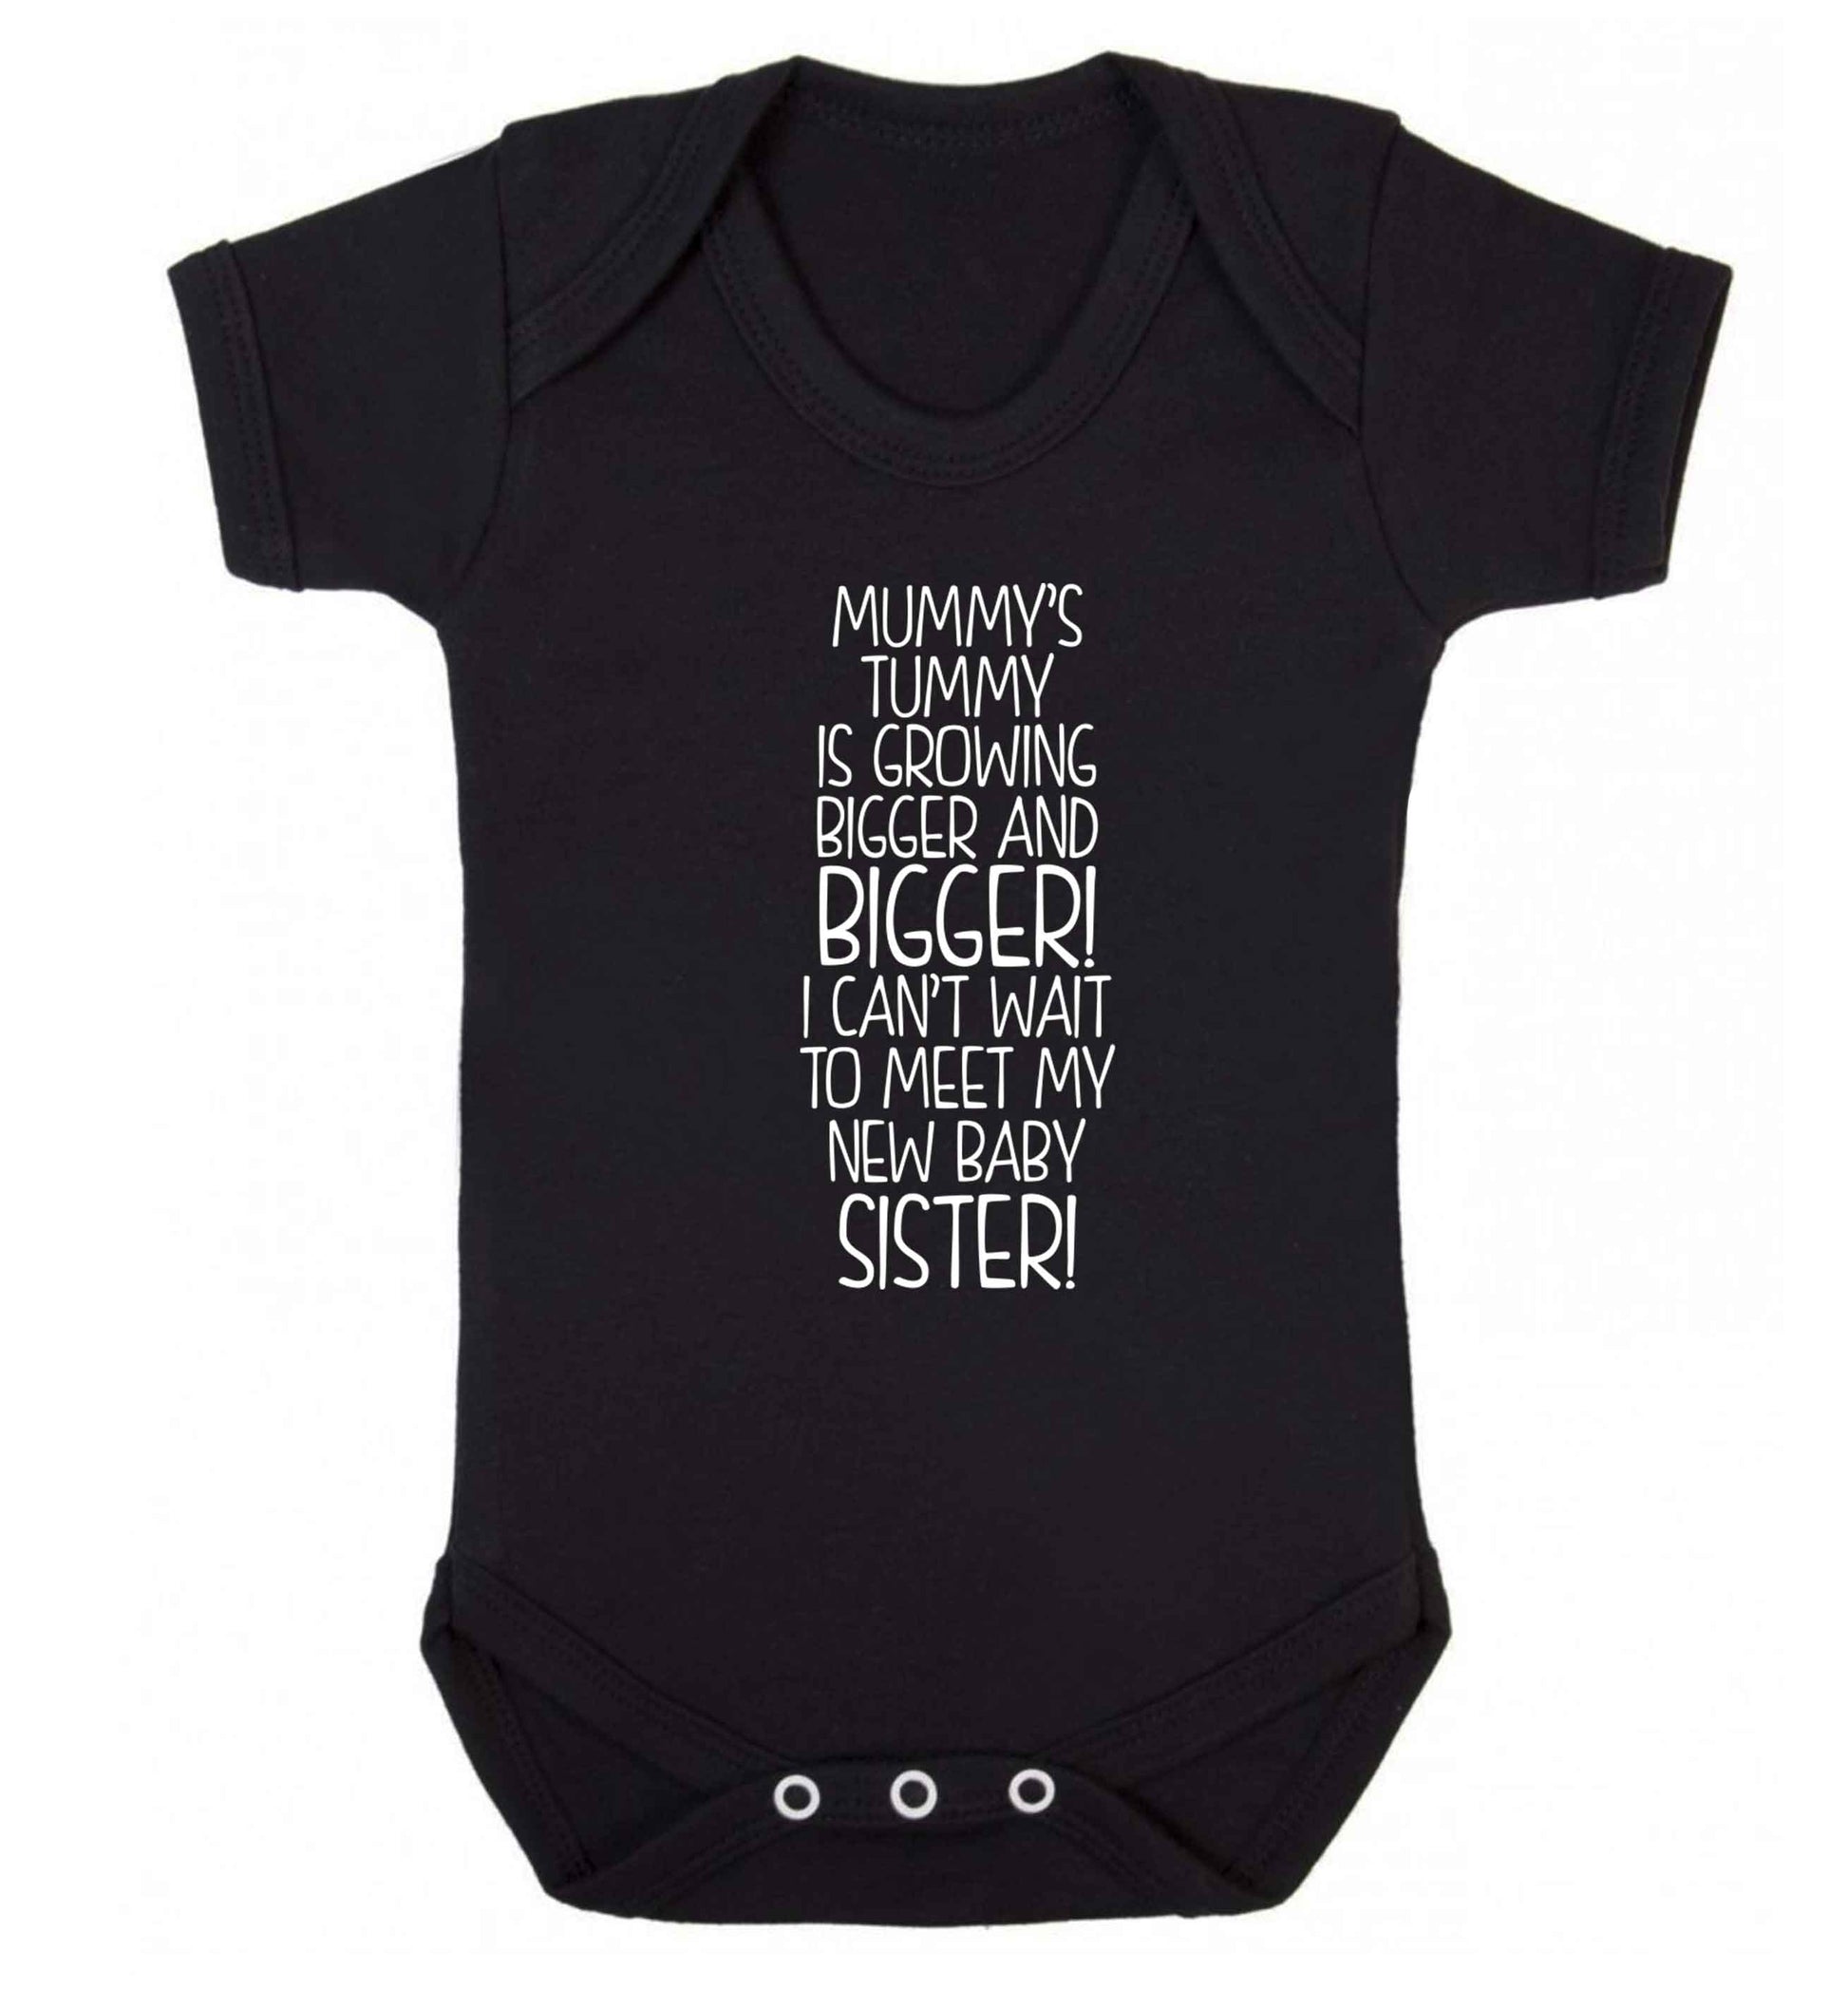 Mummy's tummy is growing bigger and bigger I can't wait to meet my new baby sister! Baby Vest black 18-24 months